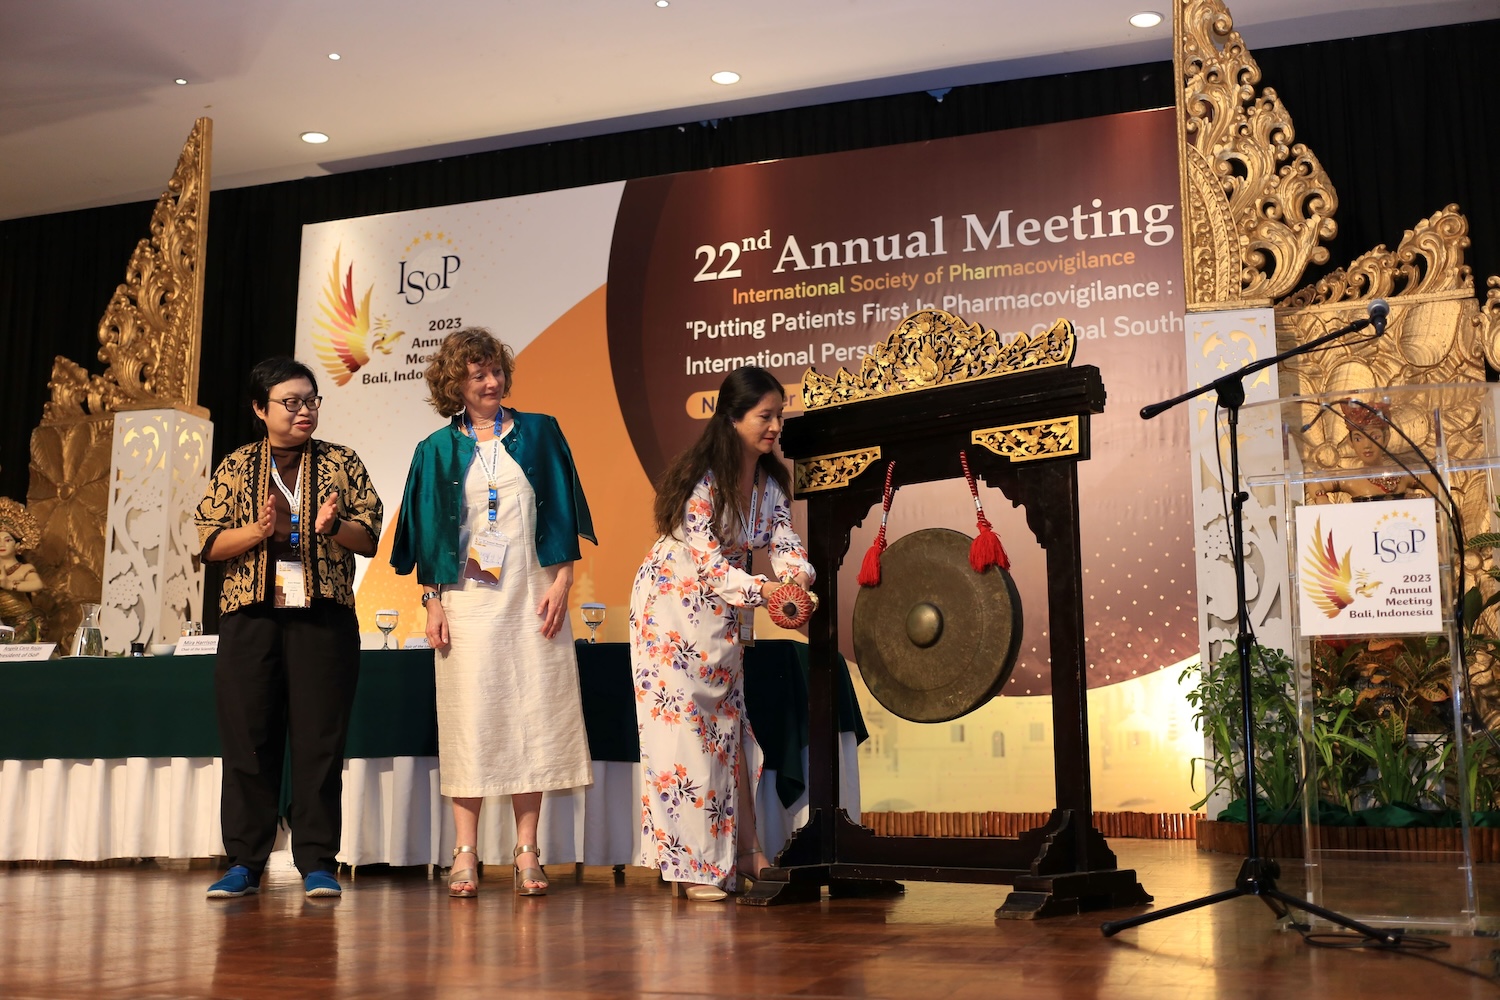 Angela Caro-Rojas, President of ISoP, strikes the gong to announce the official opening of ISoP 2023, while Grace Wangge, the chair of the local organising committee for ISoP Bali, and Mira Harrison-Woolrych, the chair of the scientific committee, look on